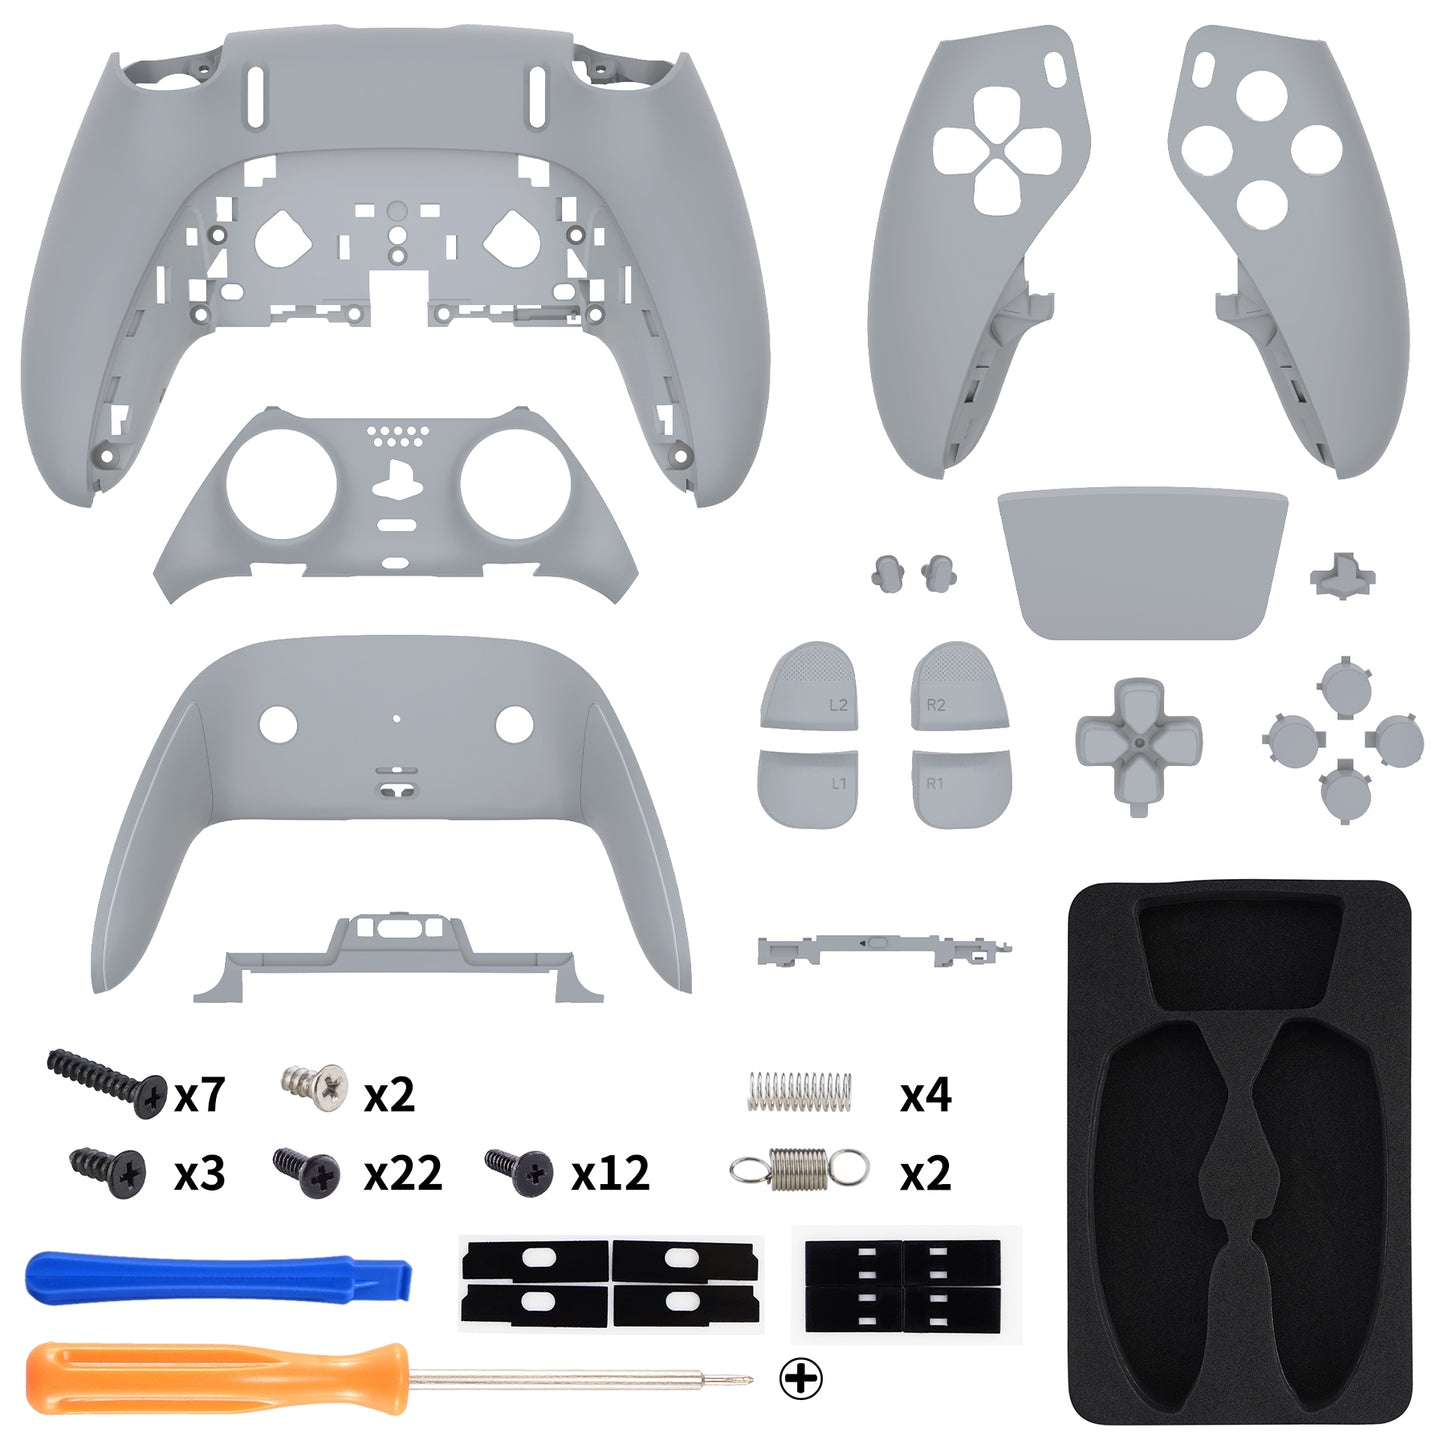 Replacement Full Set Shells with Buttons Compatible with PS5 Edge Controller - New Hope Gray eXtremeRate